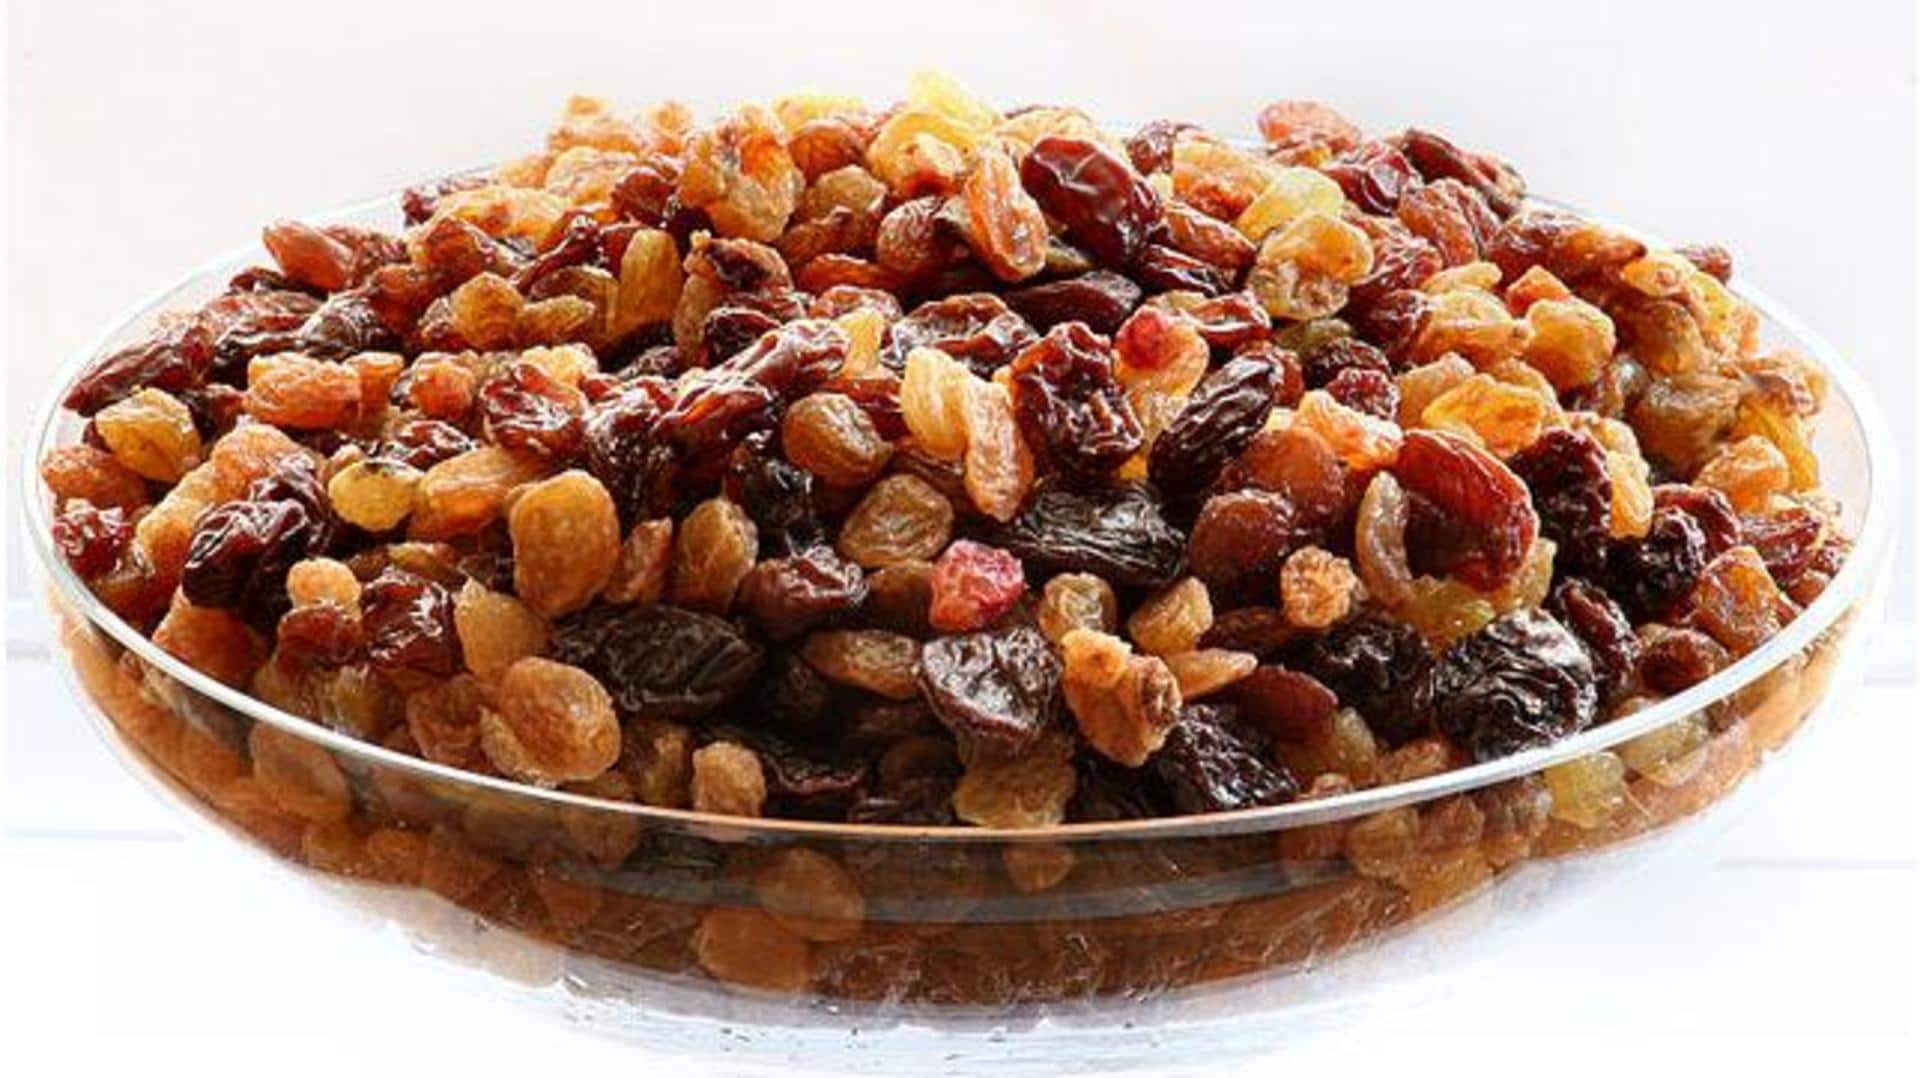 National Raisin Day: 5 recipes to try today